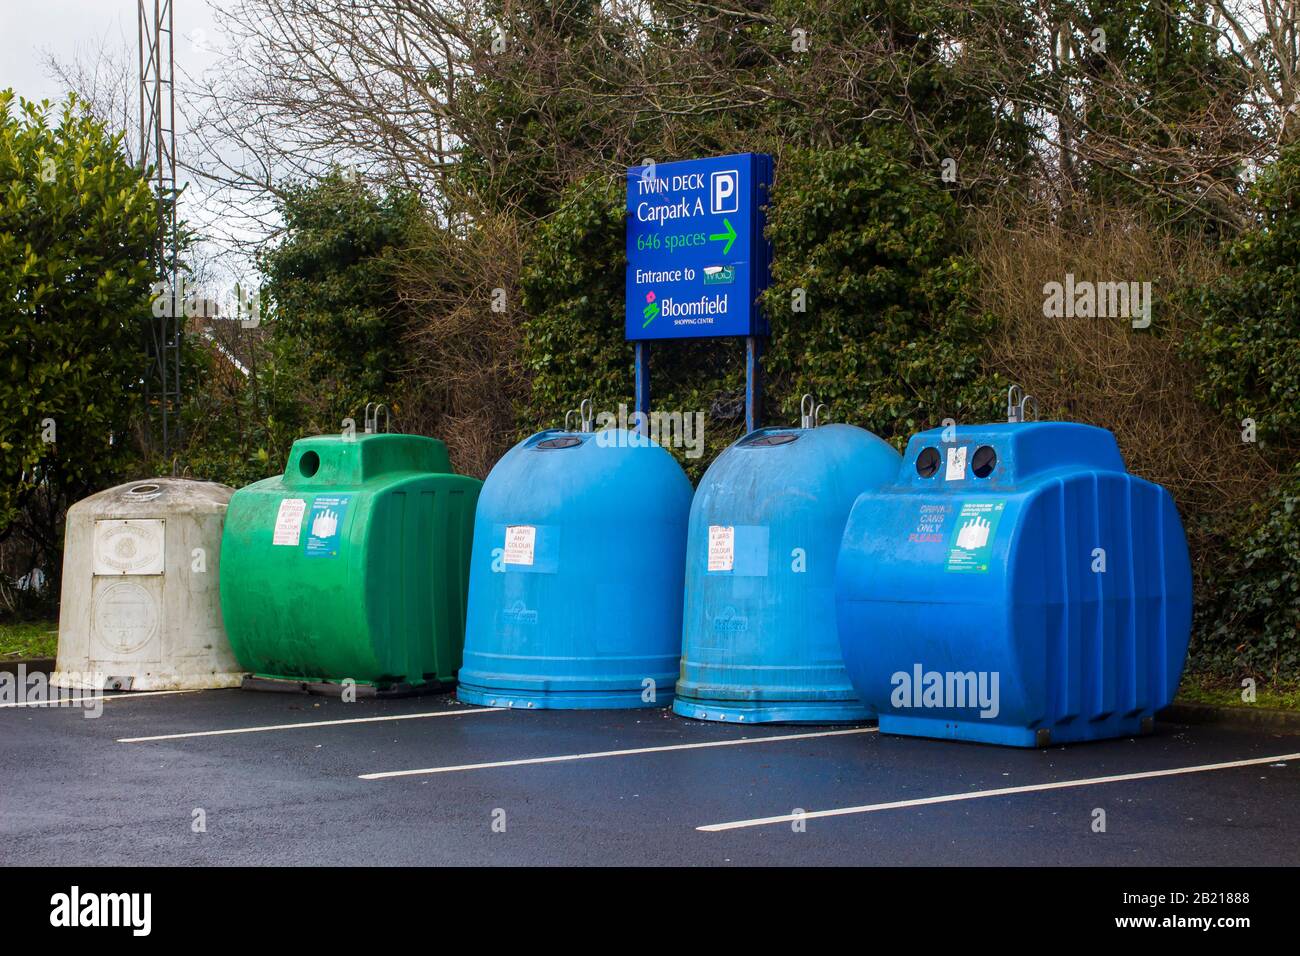 28 February 2020 A bottle bank for glass recycling located in the corner of the car park at Bloomfield Shopping Centre in Bangor Northern Ireland Stock Photo